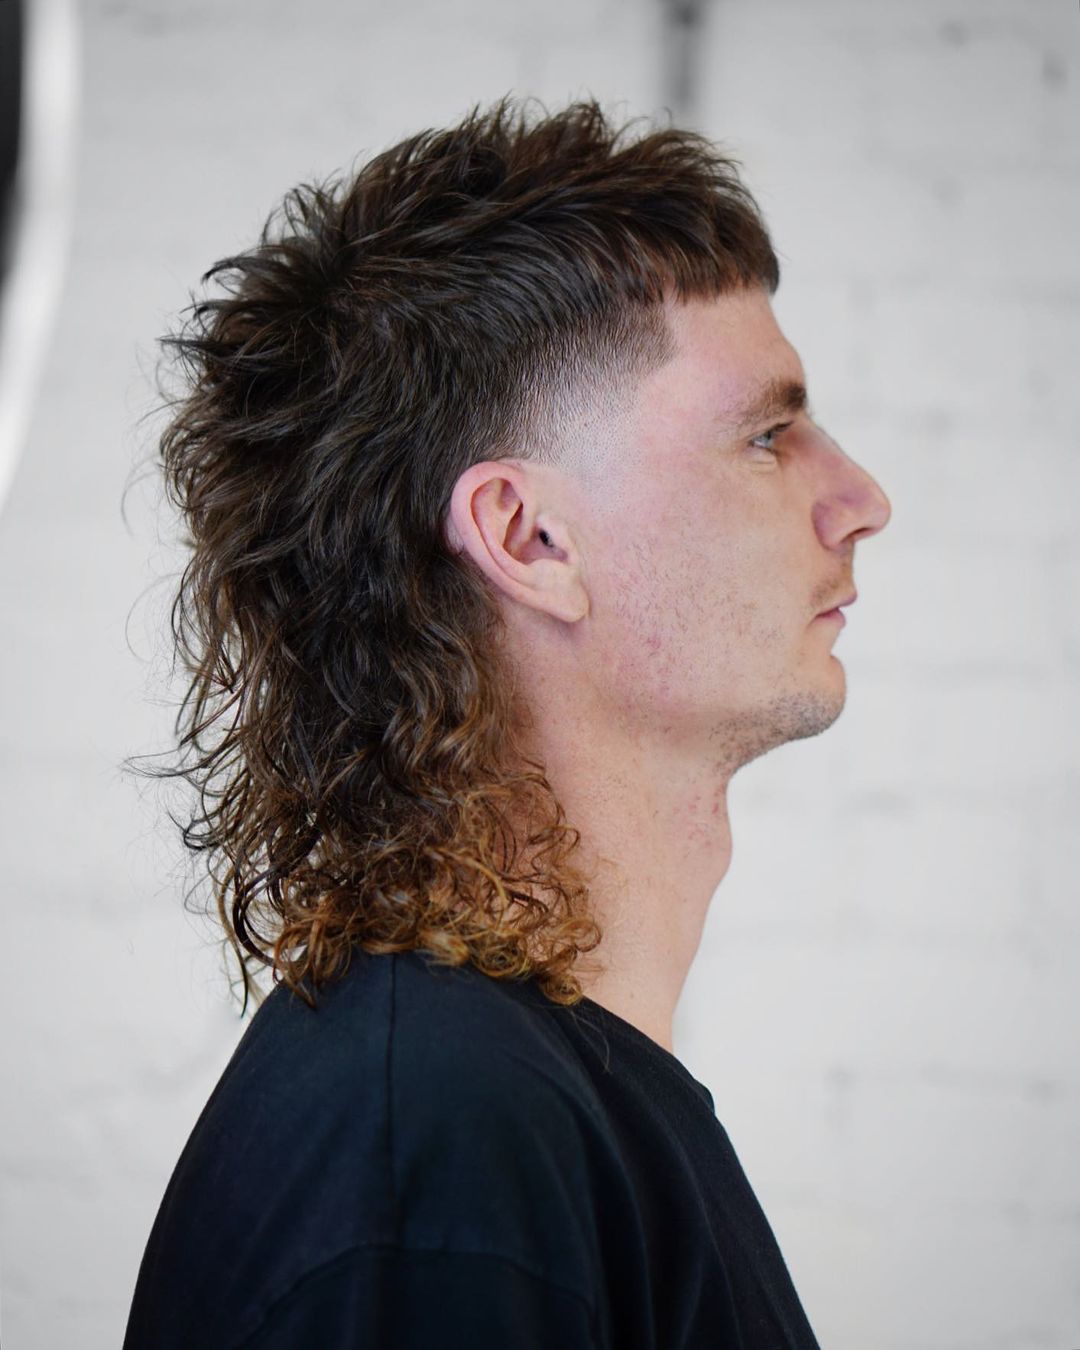 Long mullet haircut from brodiethebarber